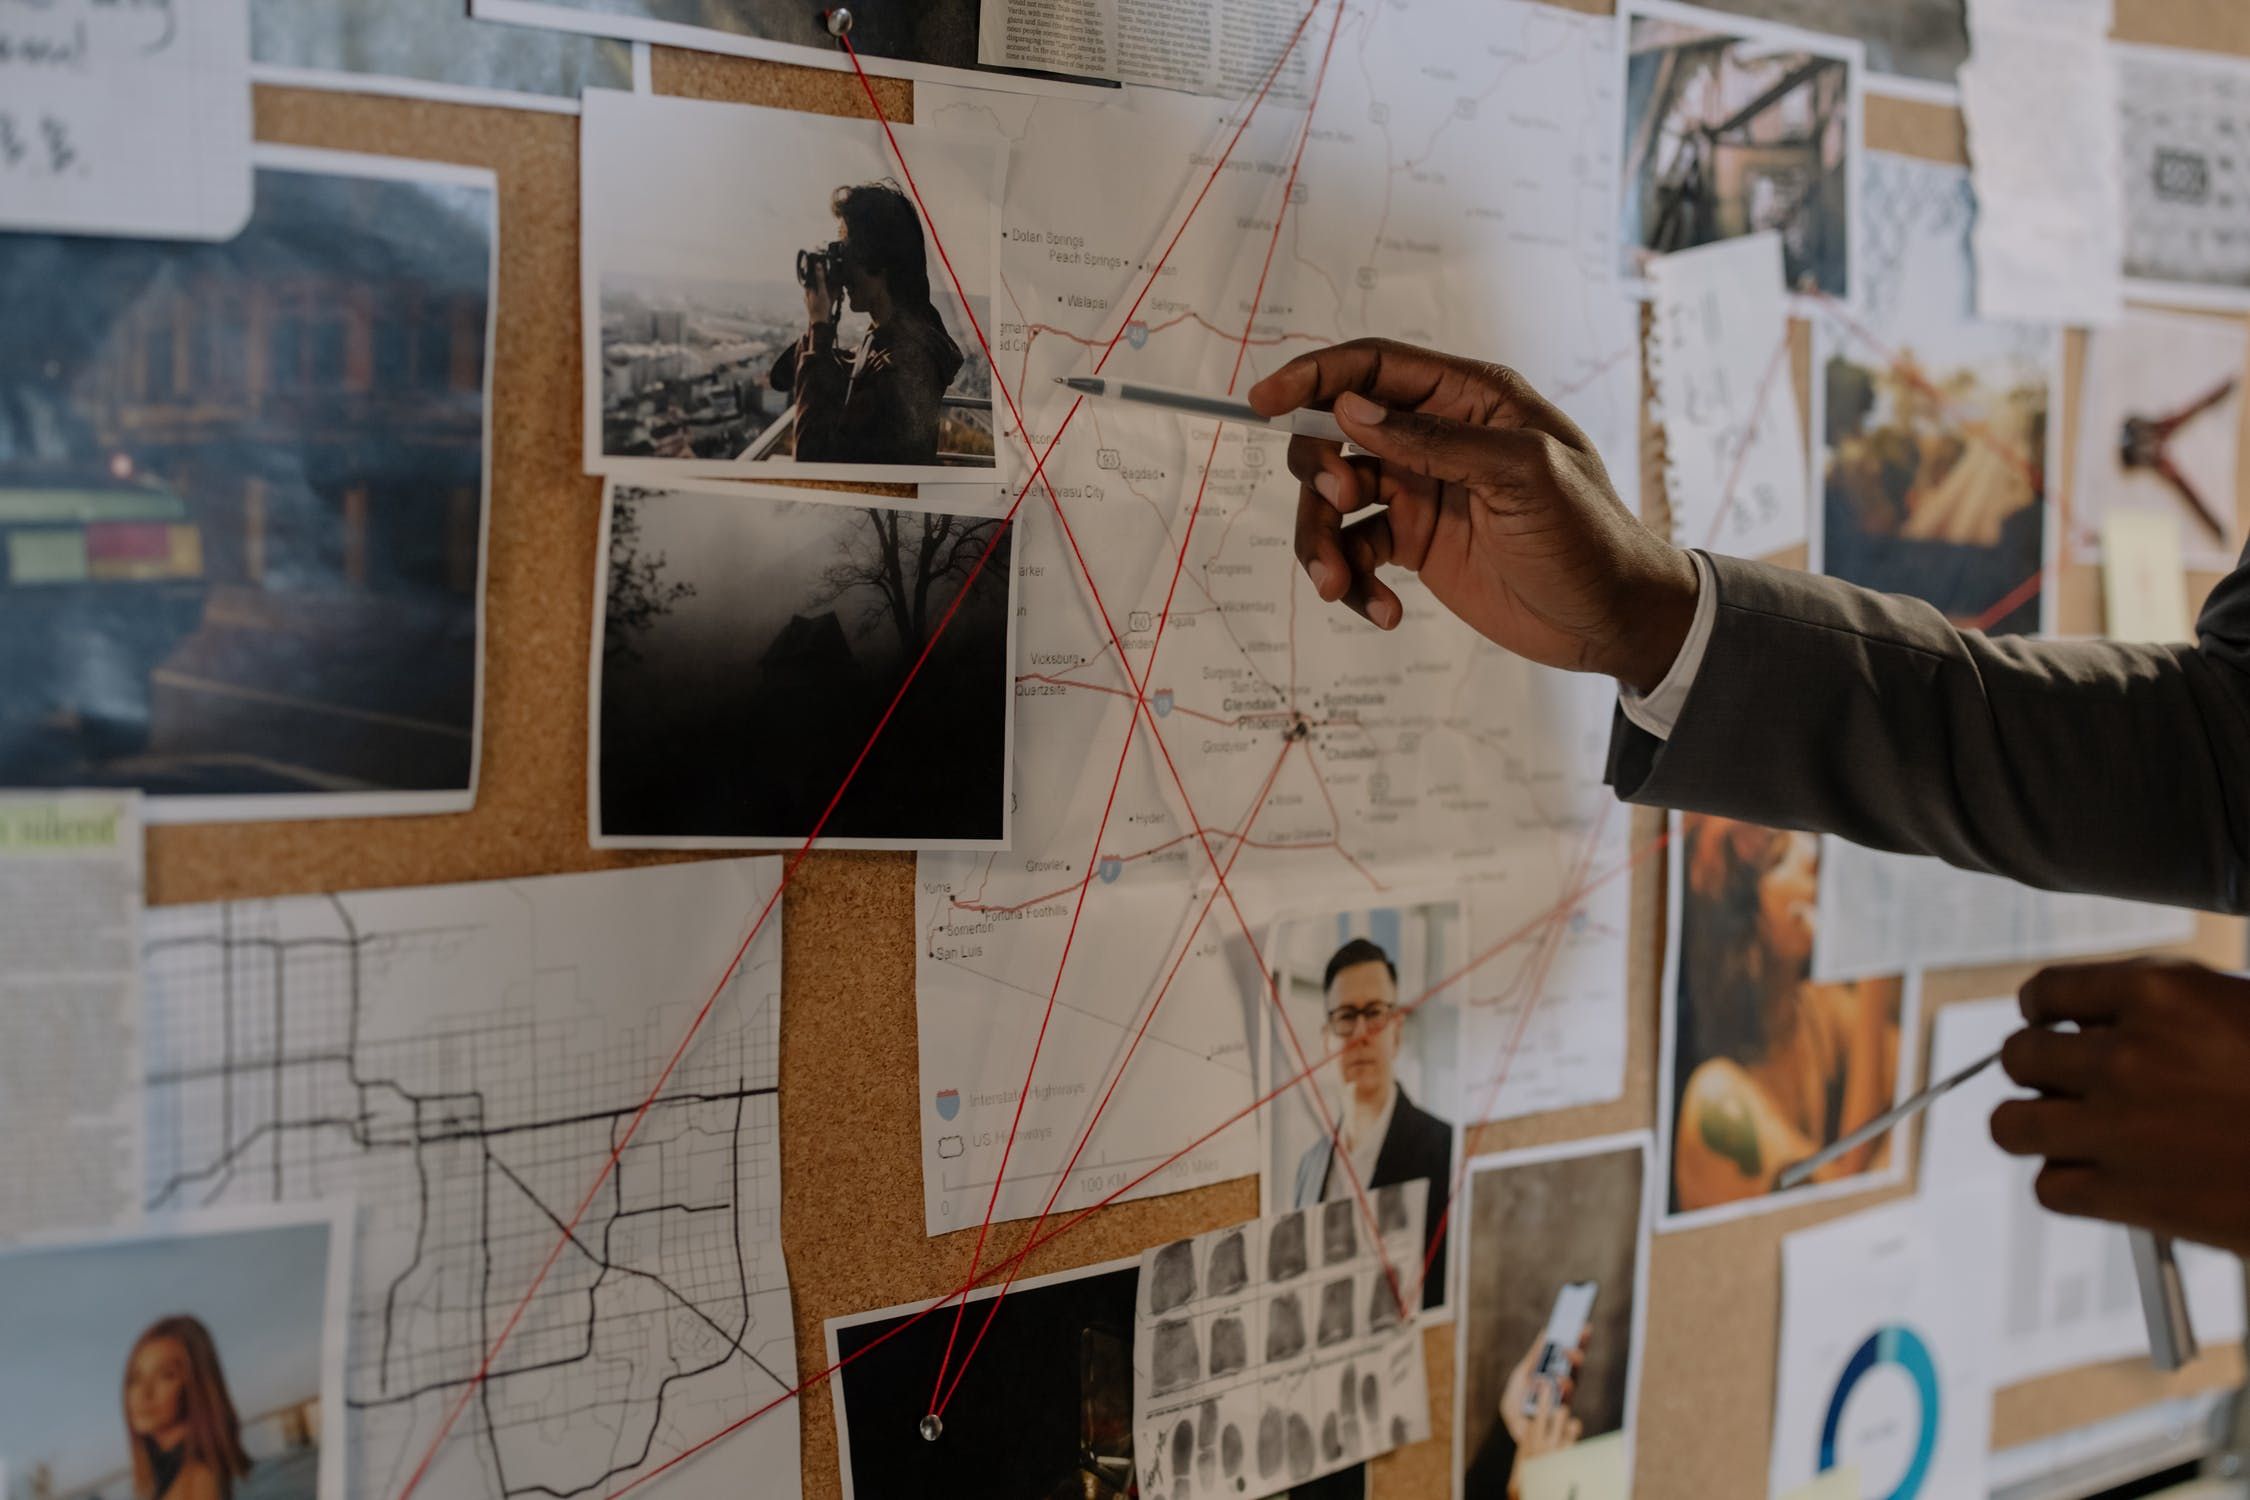 Image shows a pinboard covered in photos, maps and documents, with red strings connecting them. A man's hands and right arm are visible; he is pointing at the central photo with a pen. 